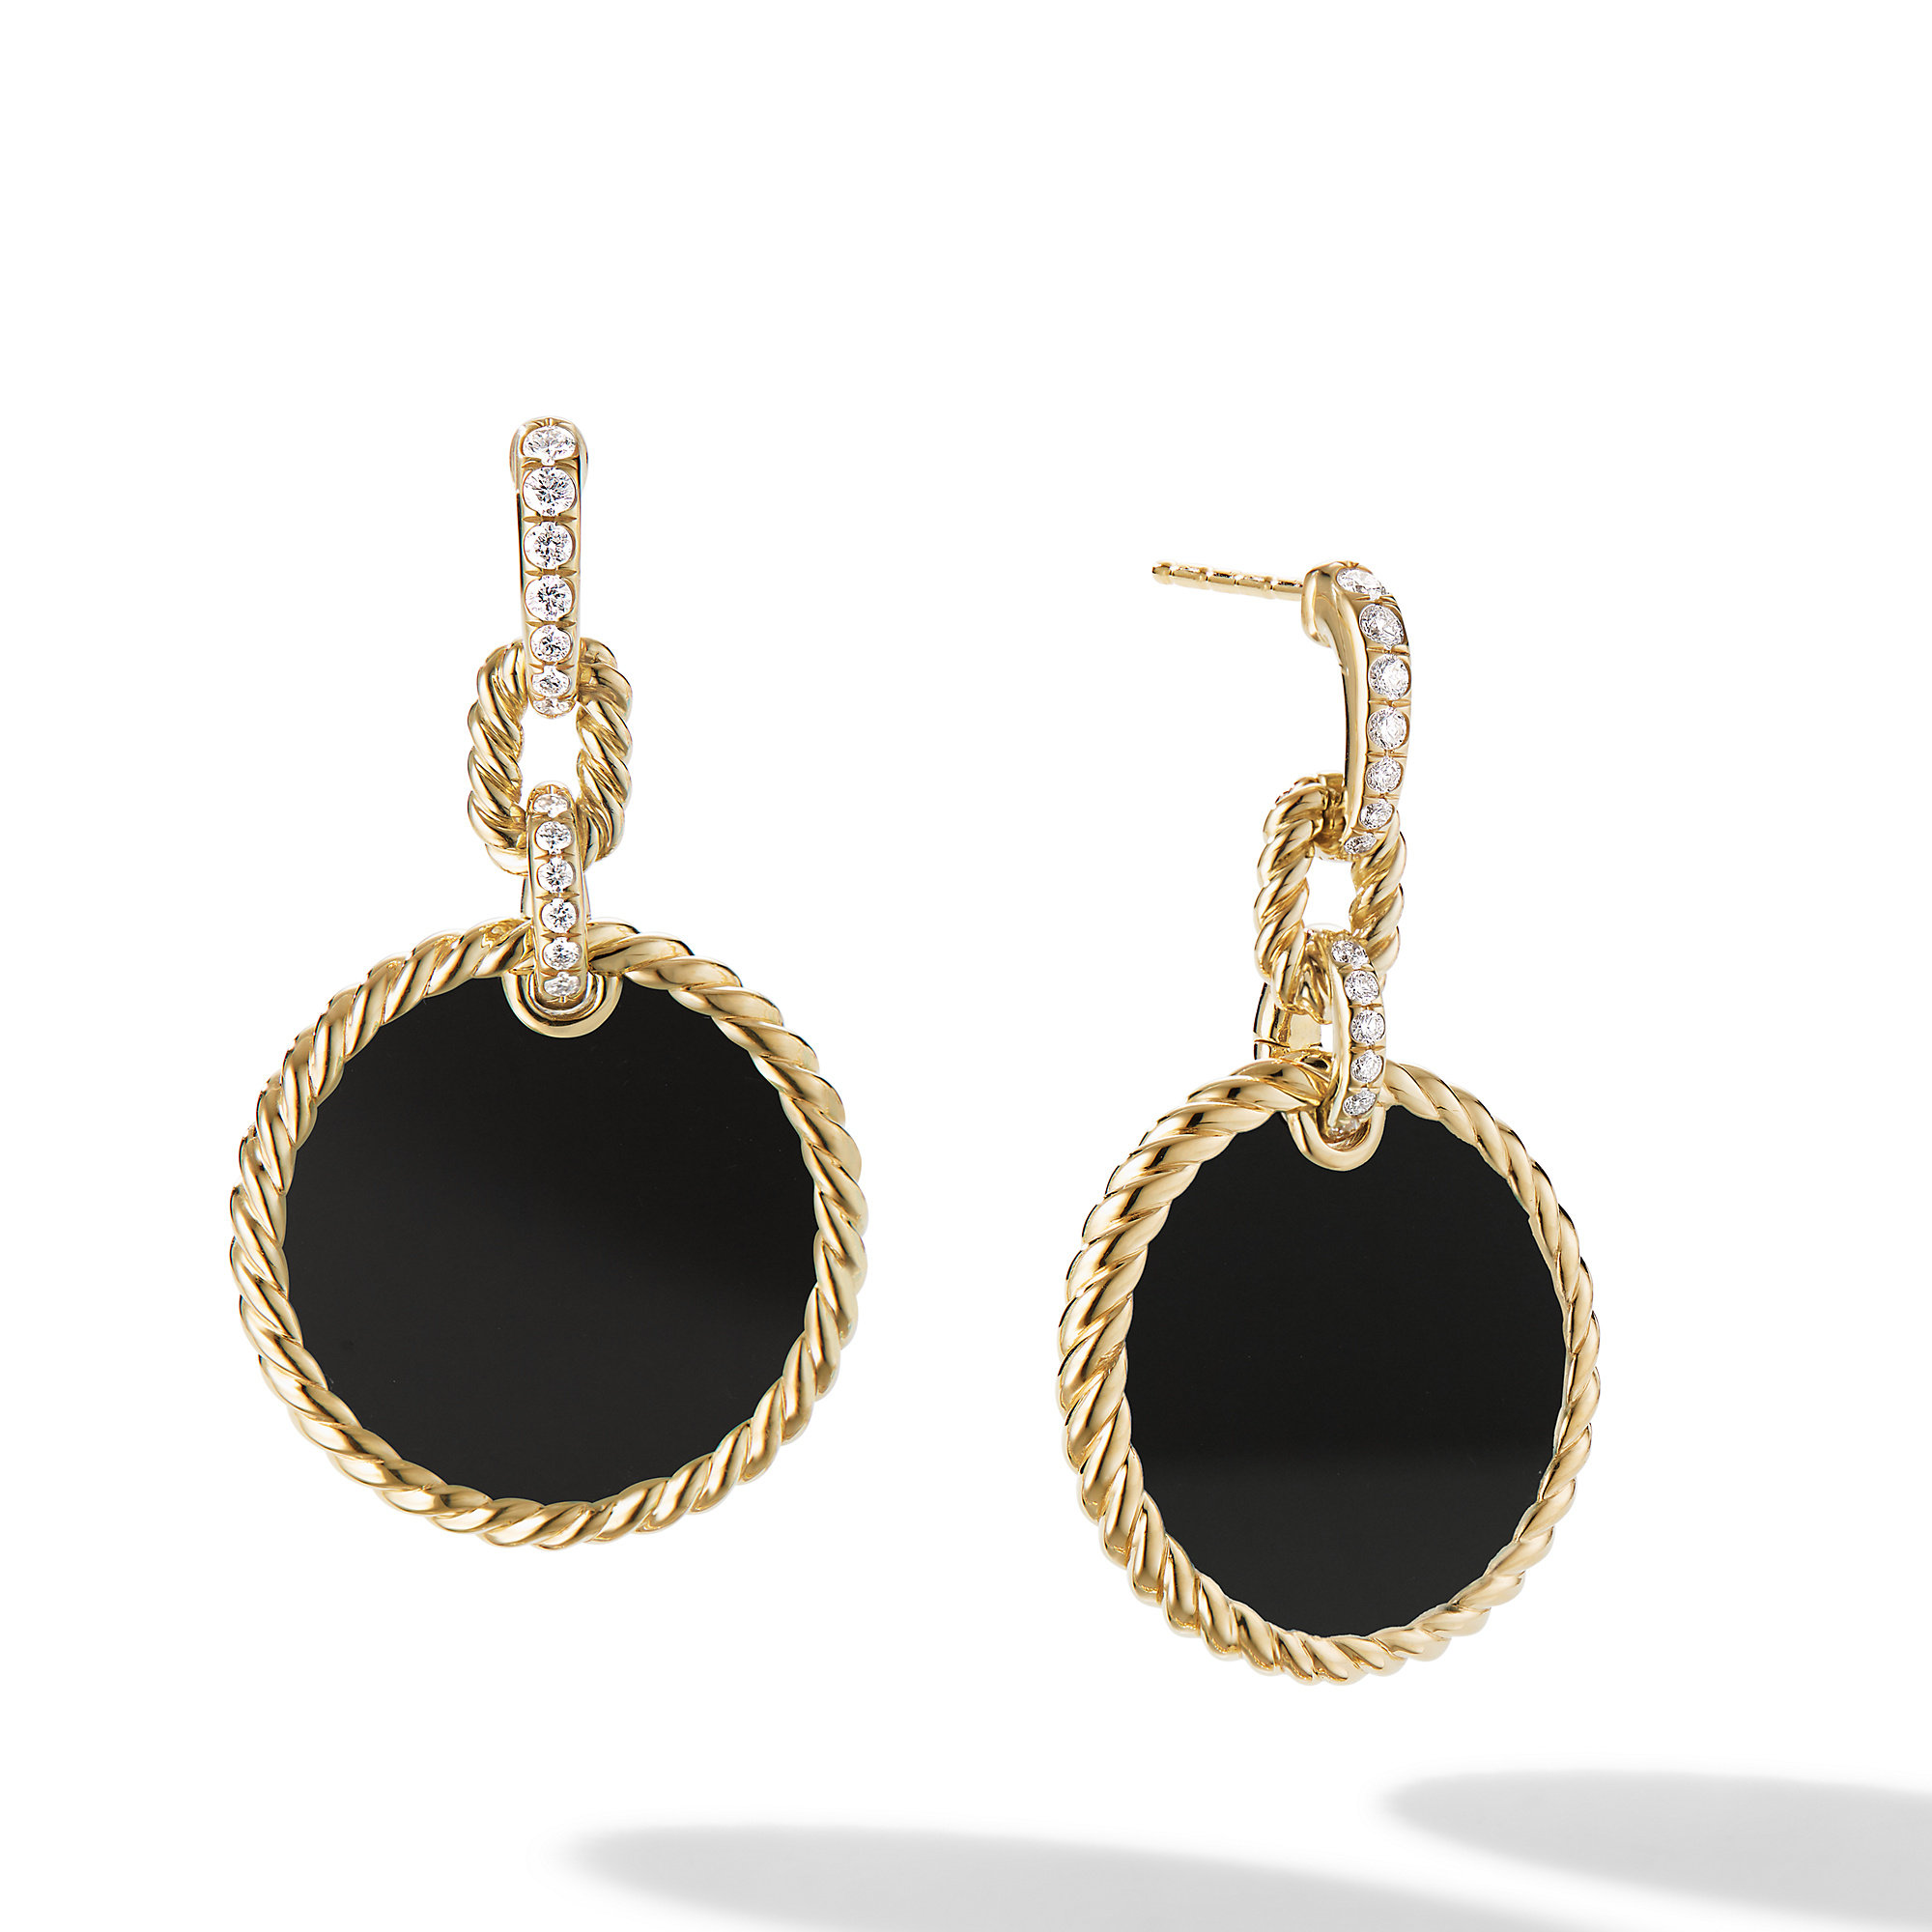 DY Elements® Convertible Drop Earrings 18K Yellow Gold with Black Onyx and Pave Diamonds